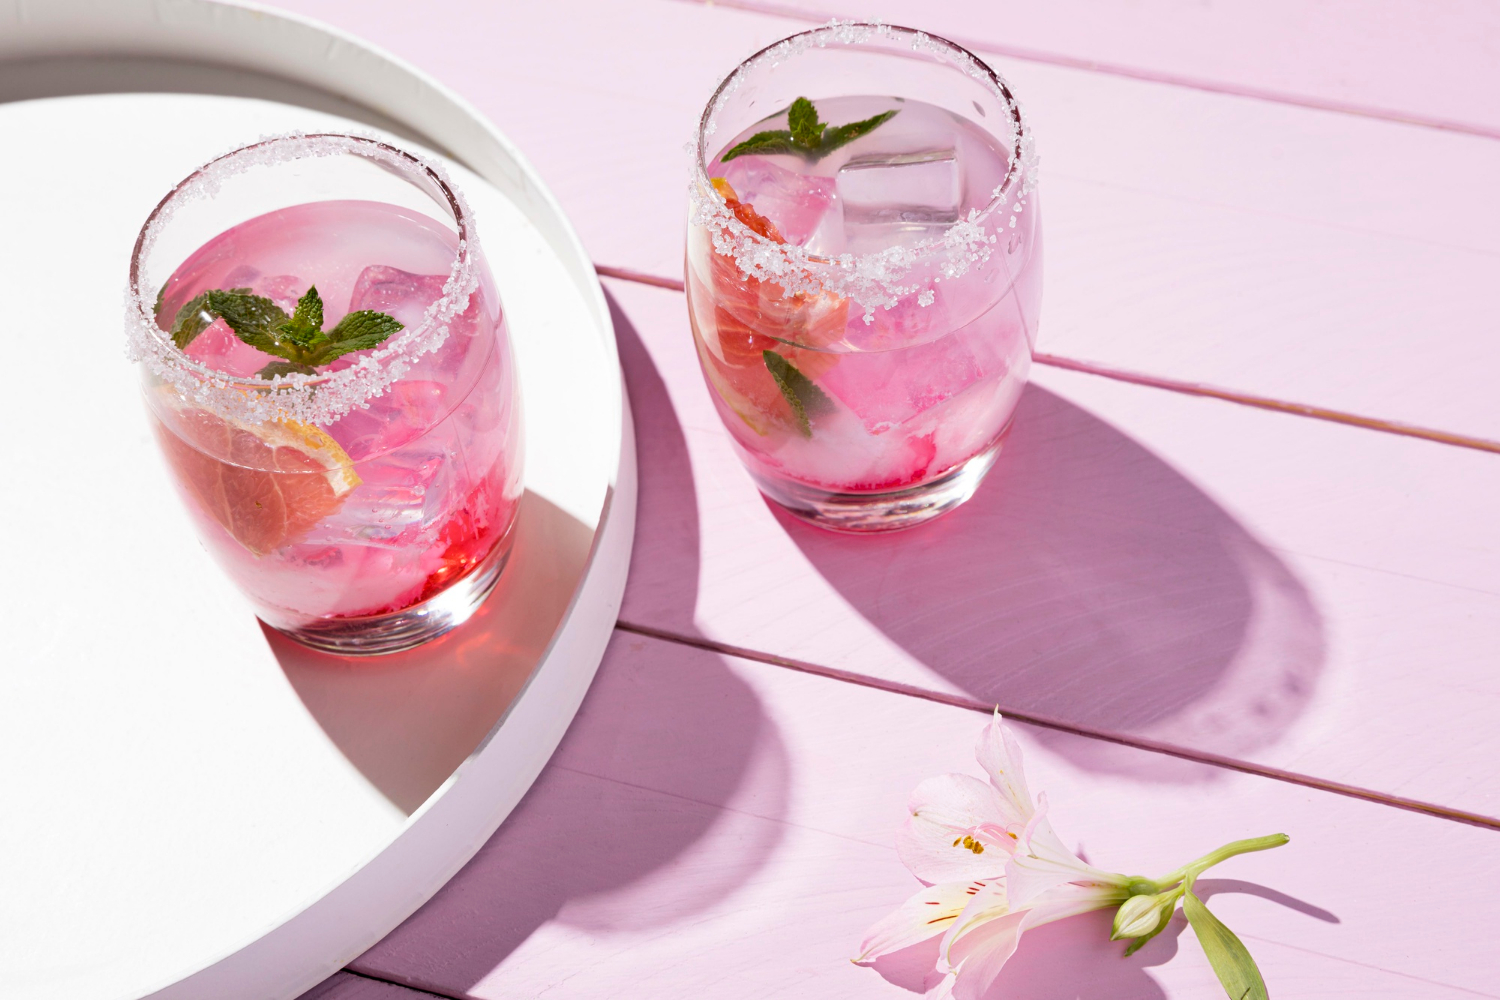 Two glasses of a pink Madame Butterfly-inspired cocktail, delicately garnished with mint on a sunlit table